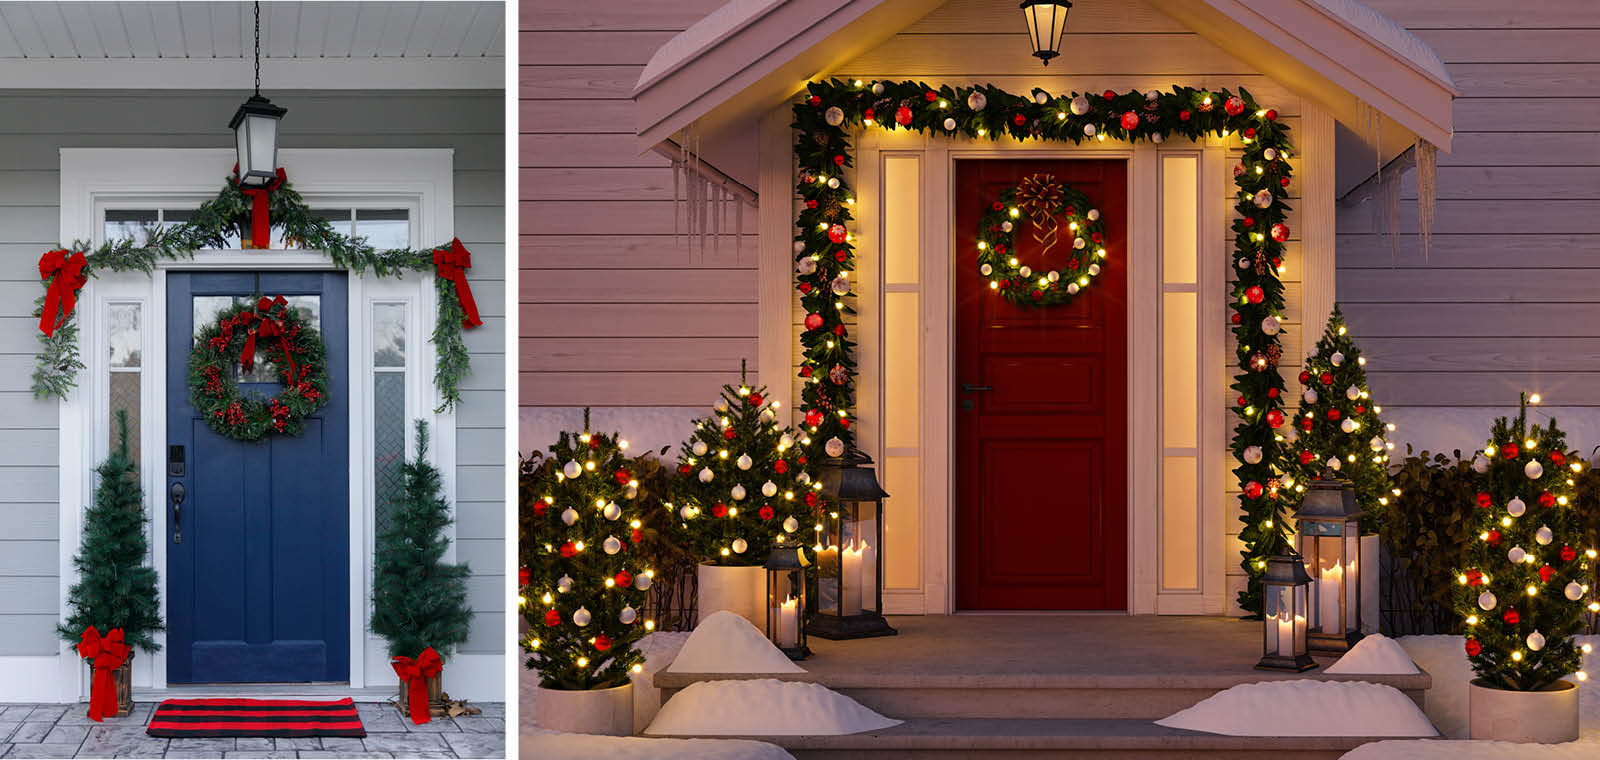 Image 1: Matching topiaries flank a doorway; Image 2: rows of topiaries line the walkway leading to the front door